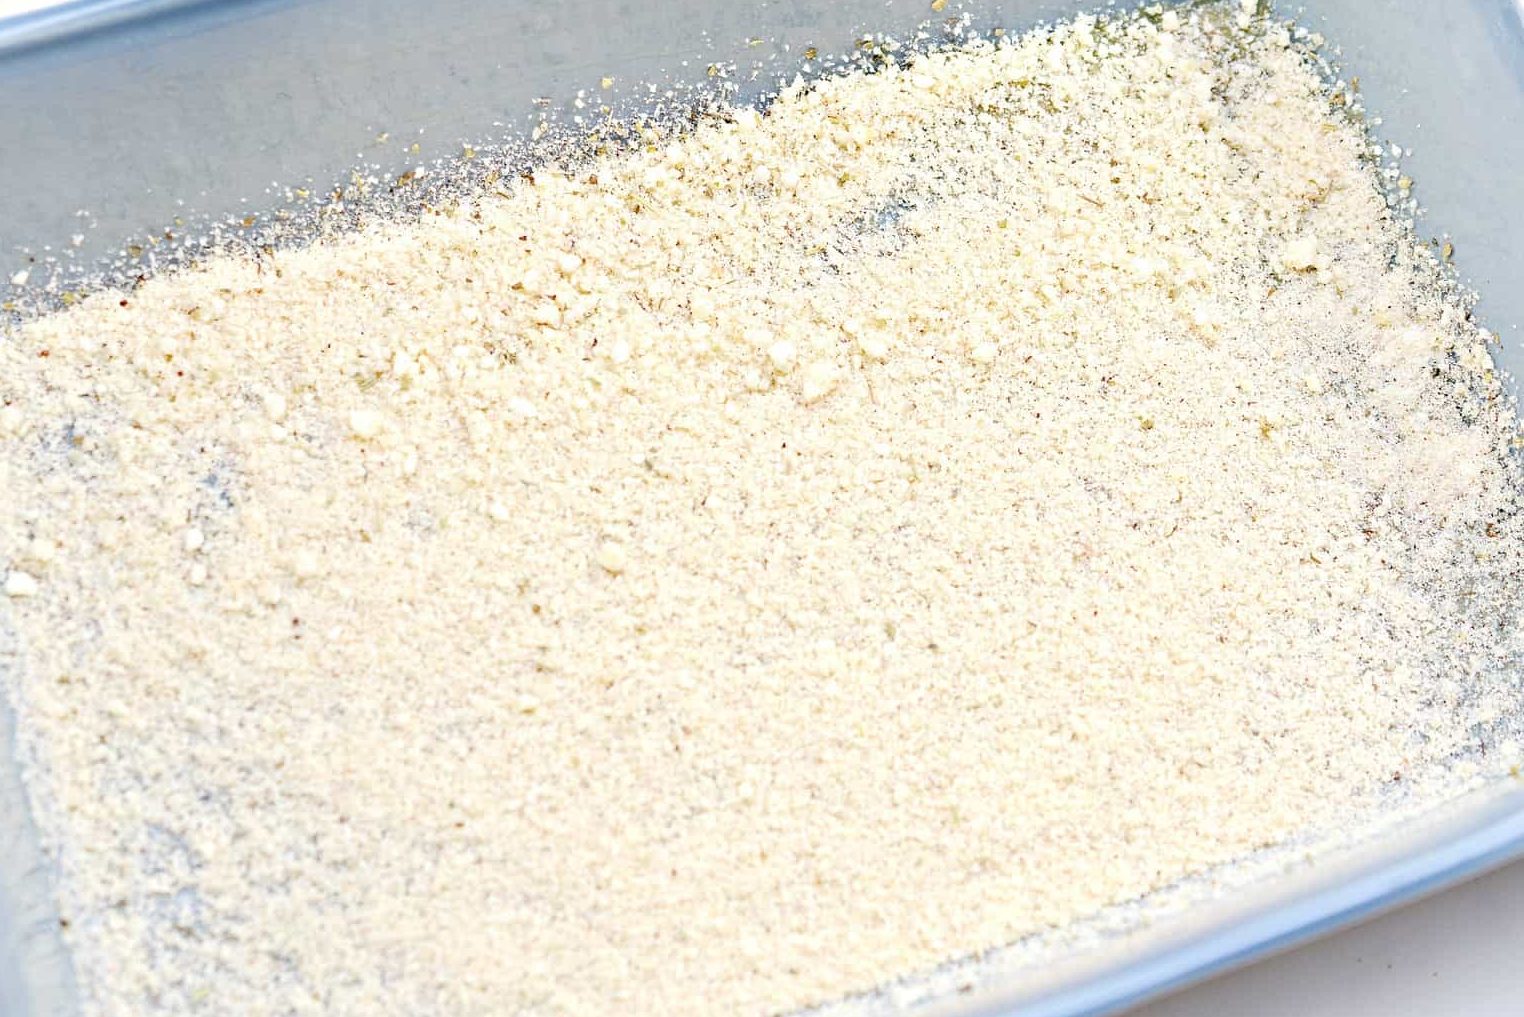 Layer the parmesan mixture into the bottom of the baking dish in an even layer.